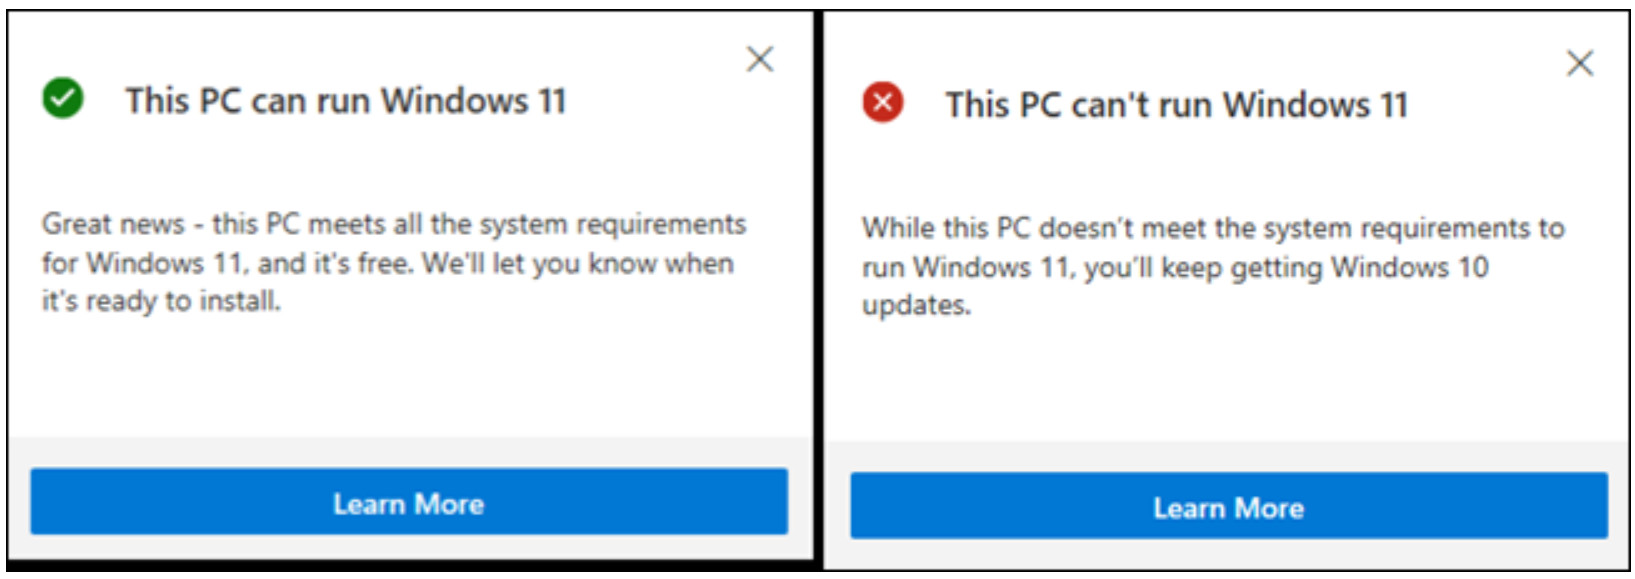 Your system appears. Win 11 системные требования для ПК. System requirements not met in Windows 11. Let check if this PC  meets the System requirements.